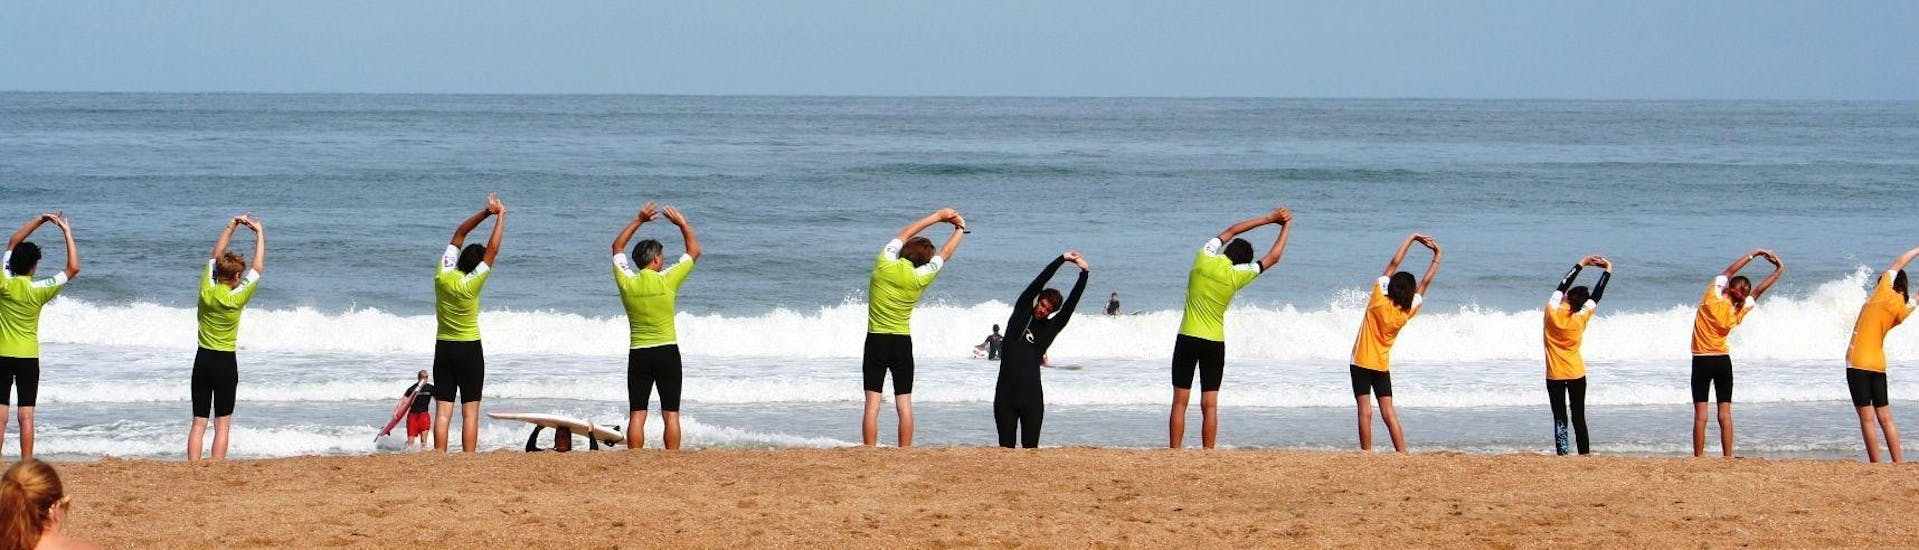 Surfers are warming up on the beach before the start of their Surfing Lessons "Week Course" on the Marinella Beach in Anglet with the surf school Le Club de la Glisse.